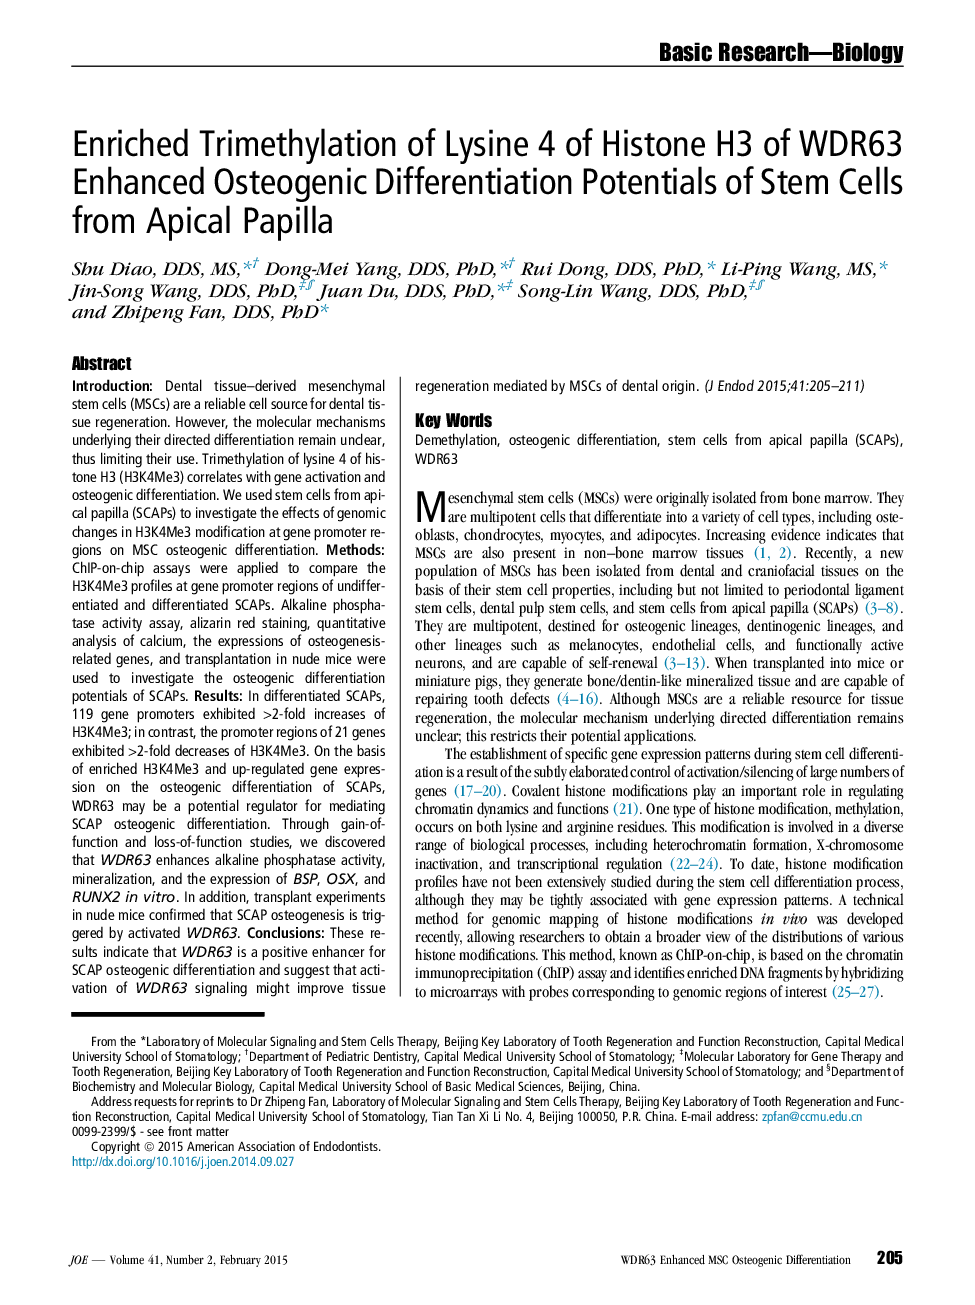 Enriched Trimethylation of Lysine 4 of Histone H3 of WDR63 Enhanced Osteogenic Differentiation Potentials of Stem Cells from Apical Papilla